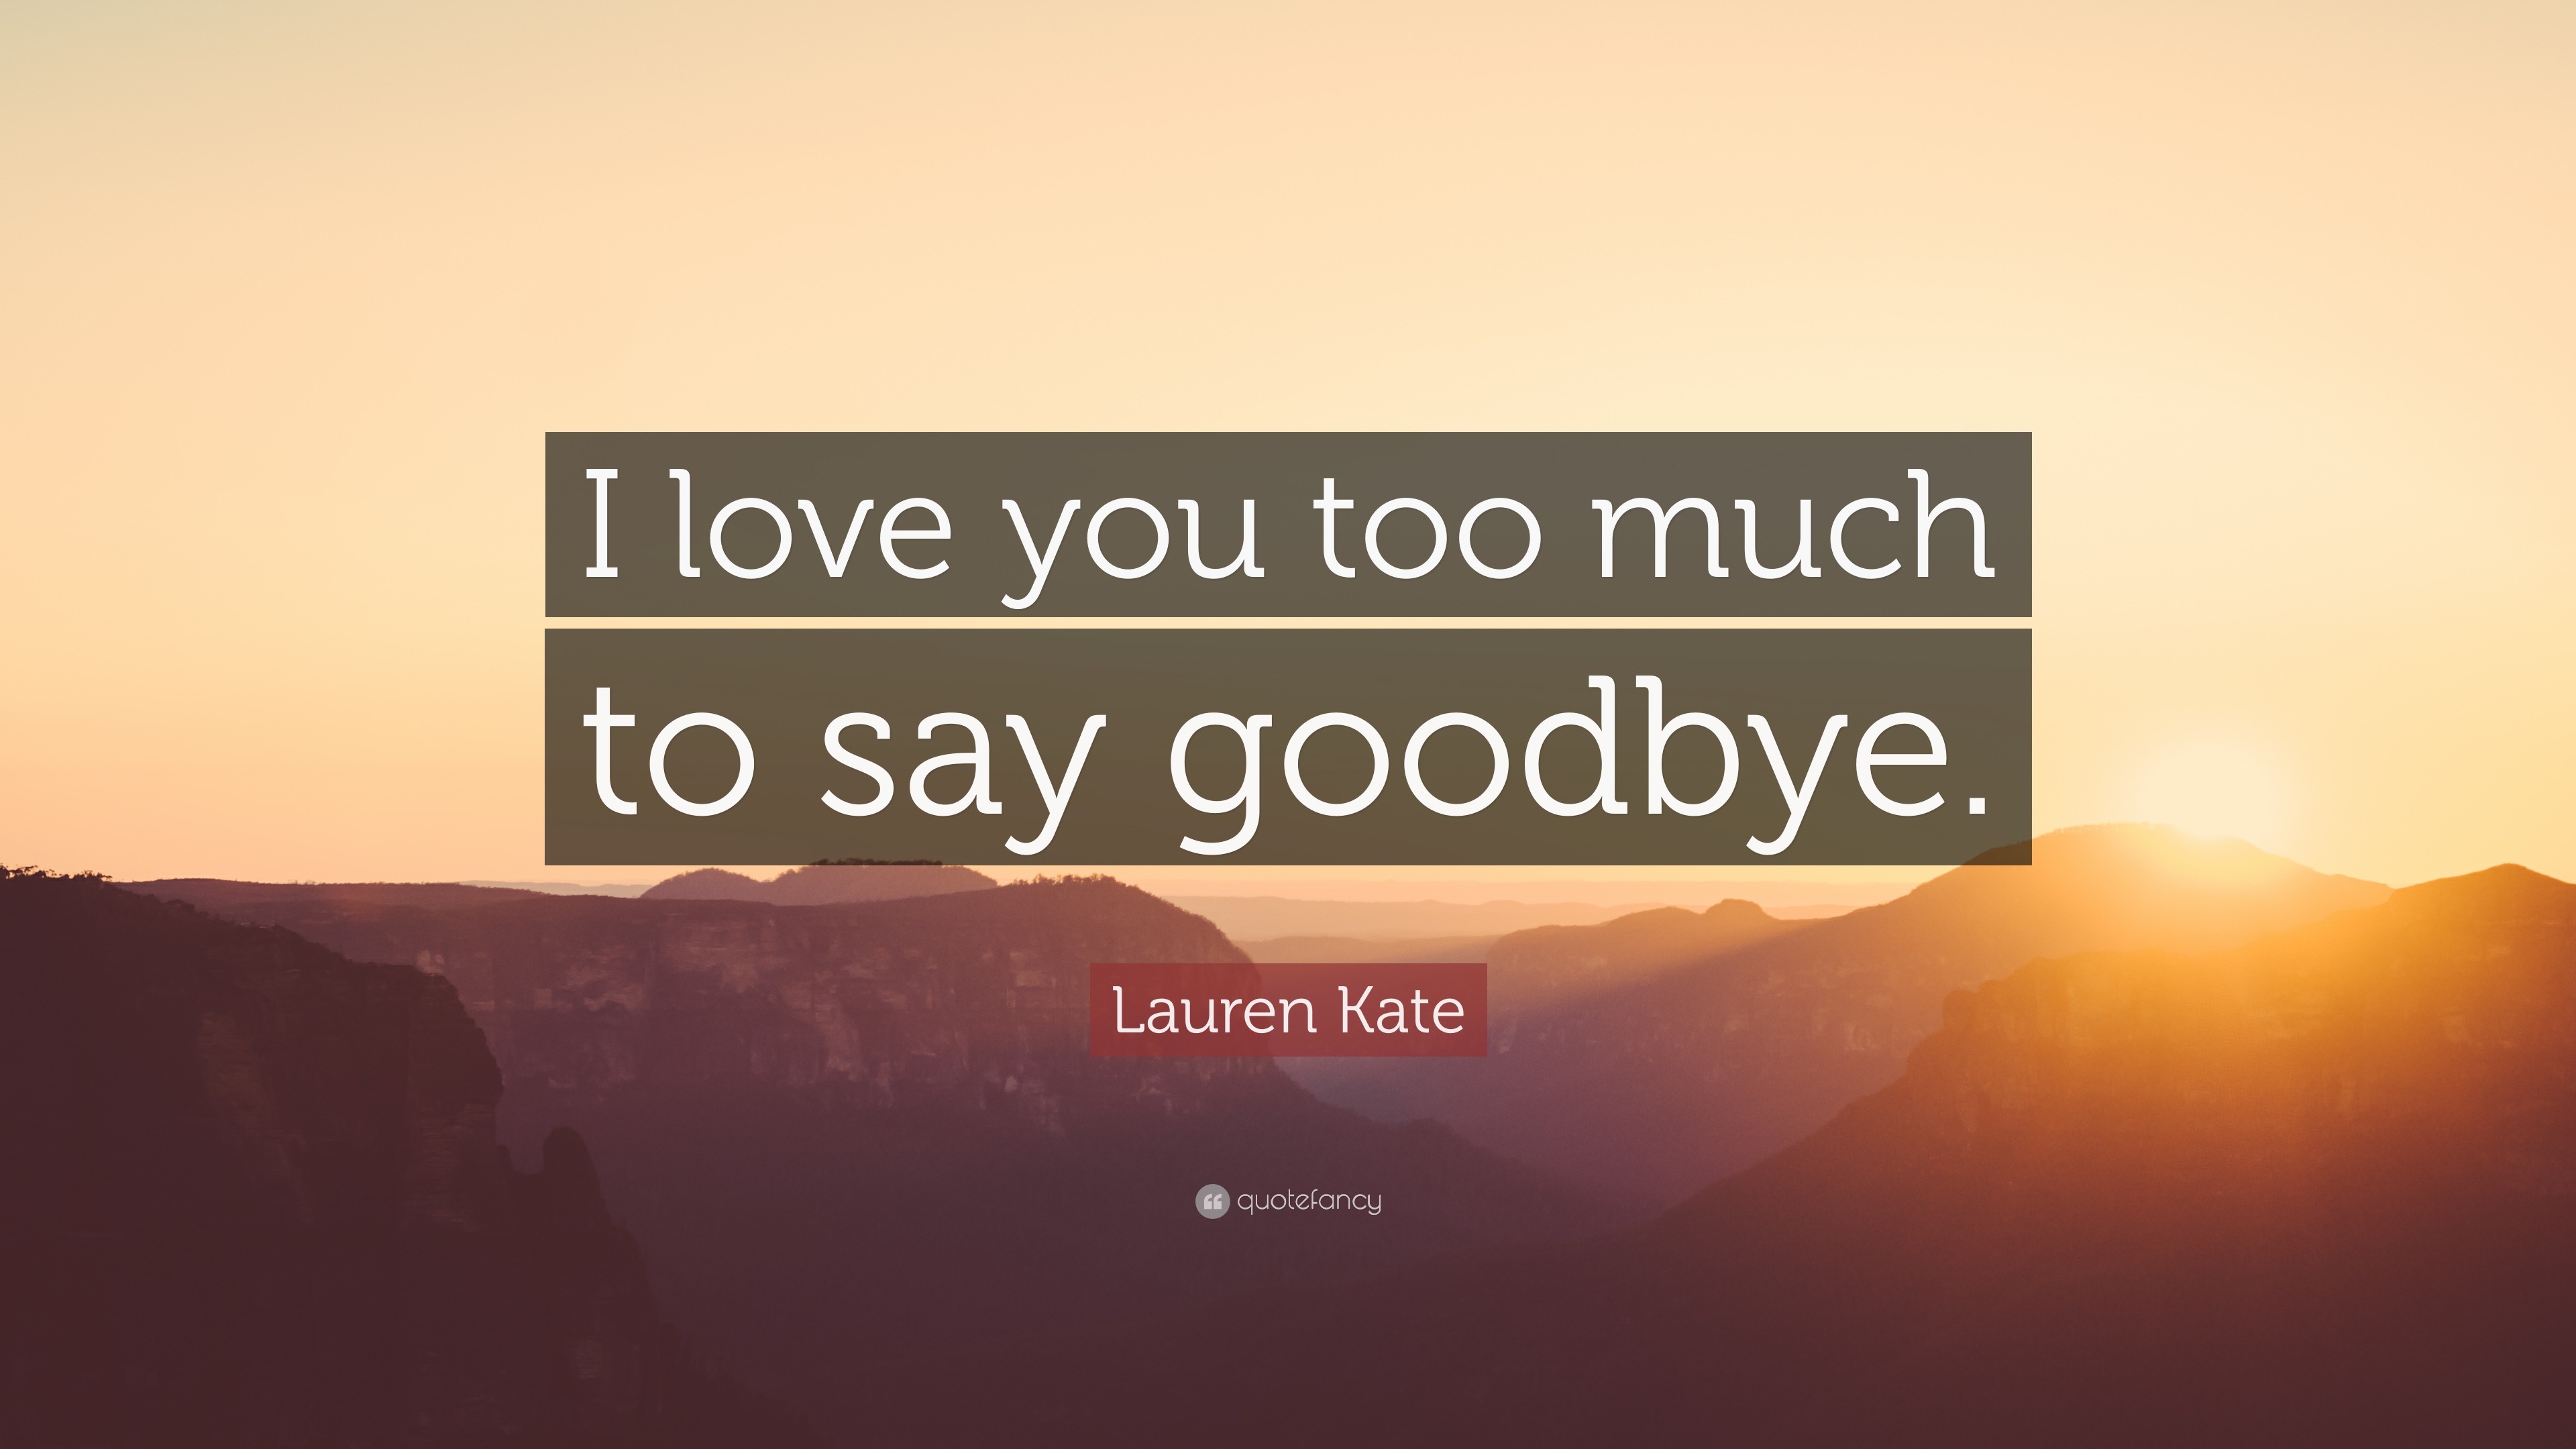 Lauren Kate Quote “I love you too much to say goodbye ”